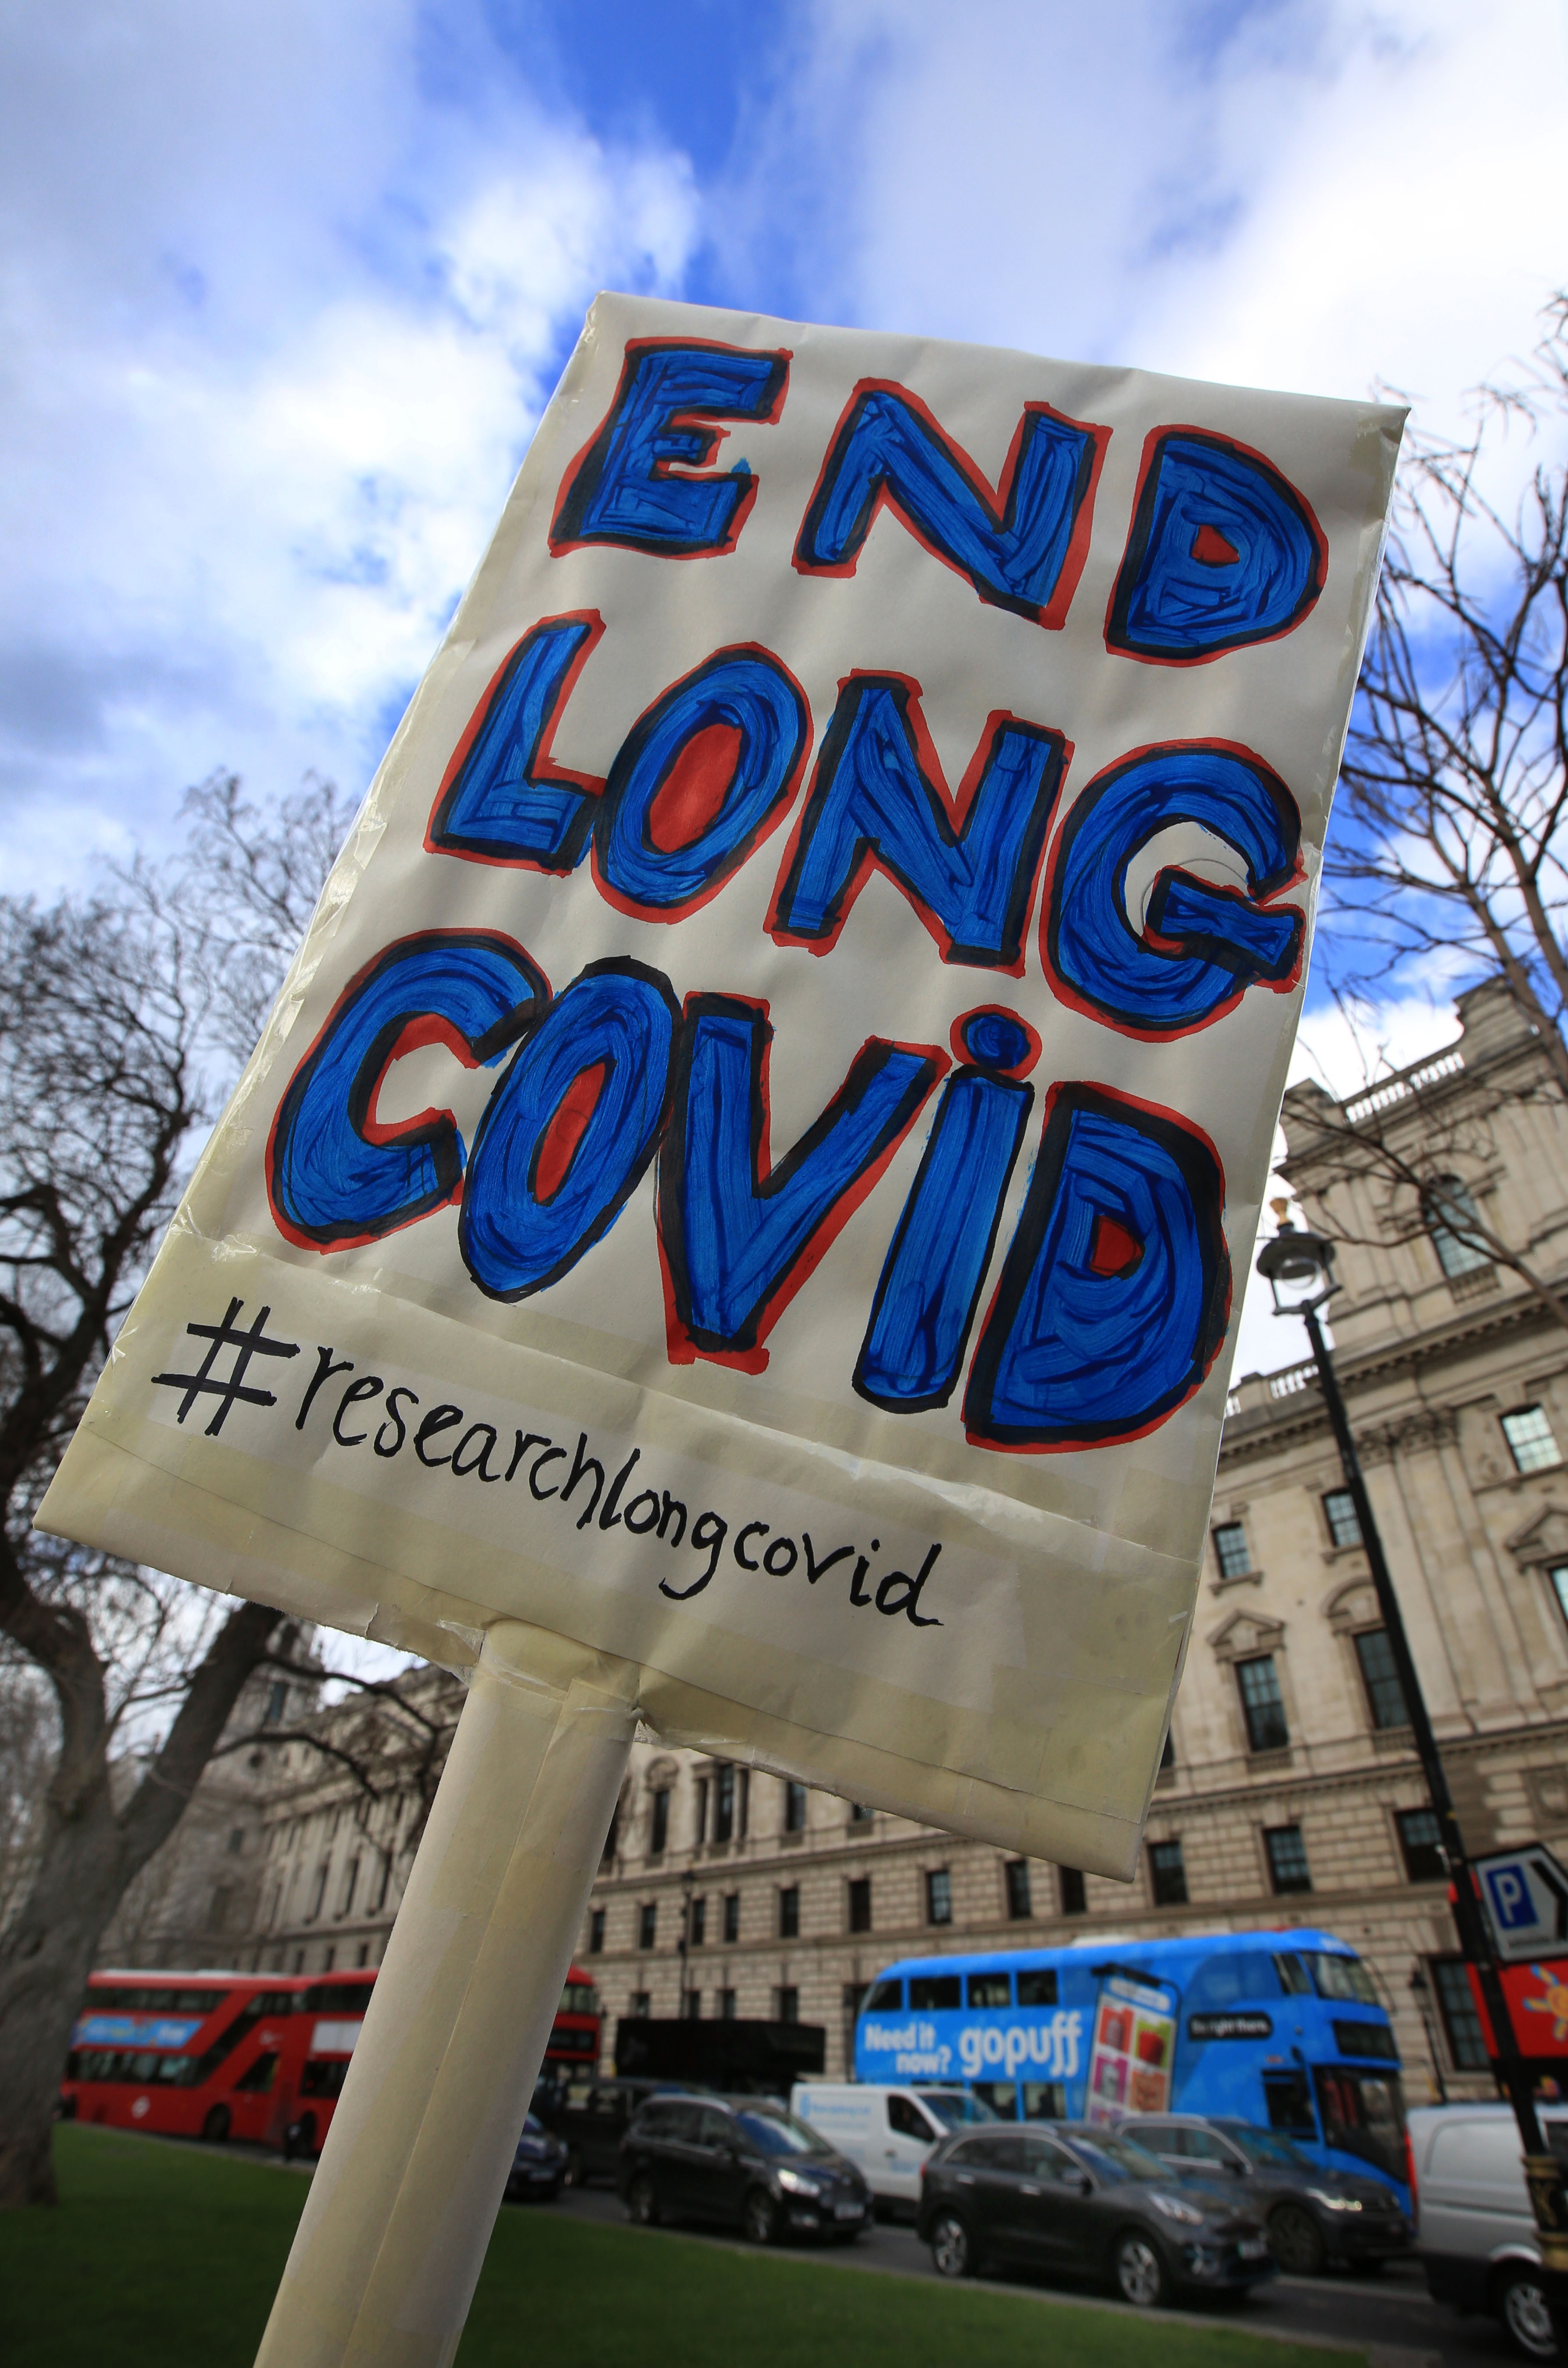 A protester holds up a placard demanding research and an end to Long Covid-19 during ademonstration.